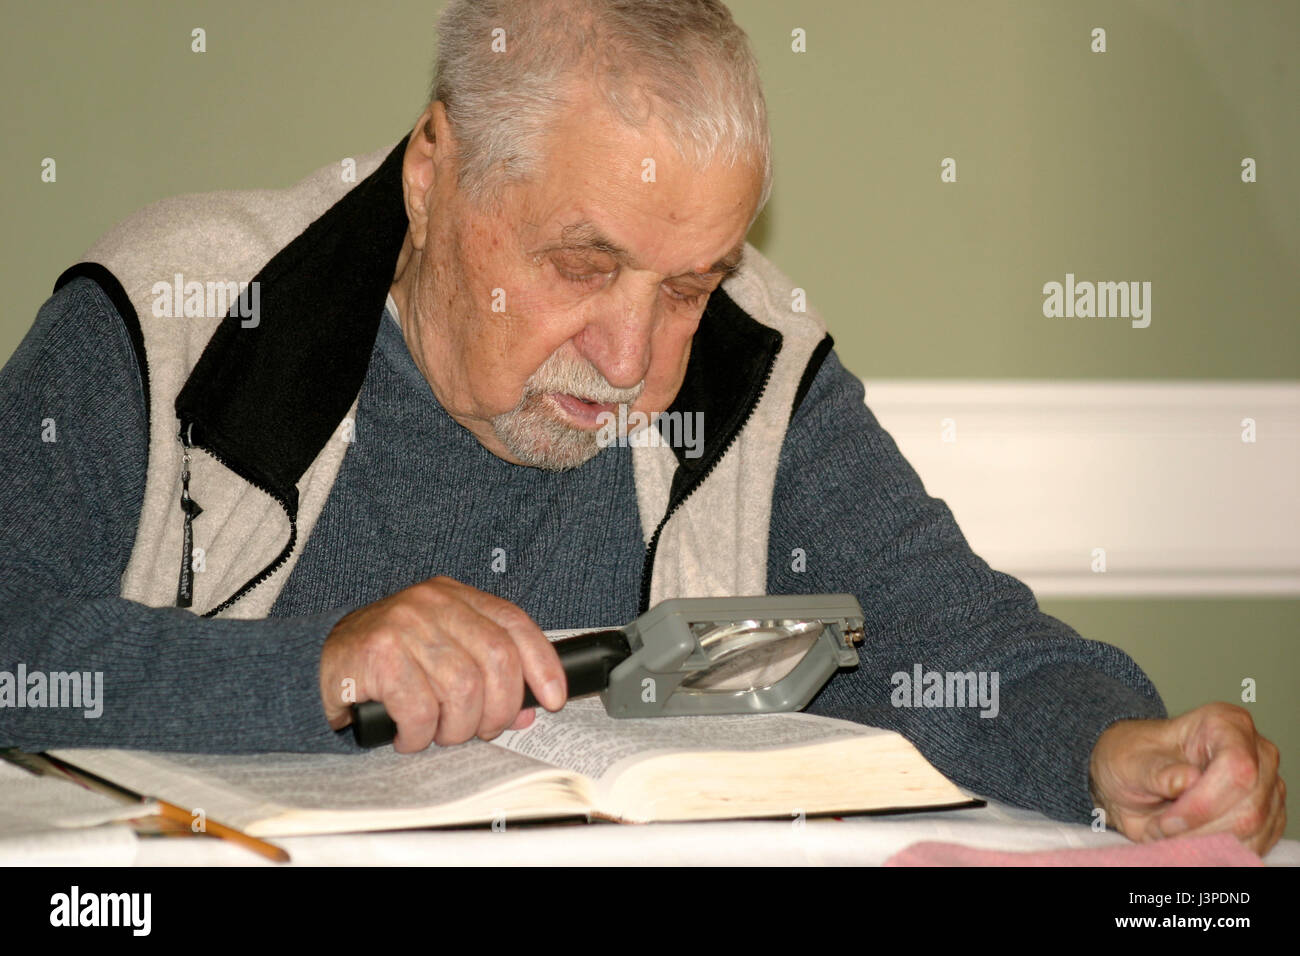 Old man reading with magnifying glass Stock Photo